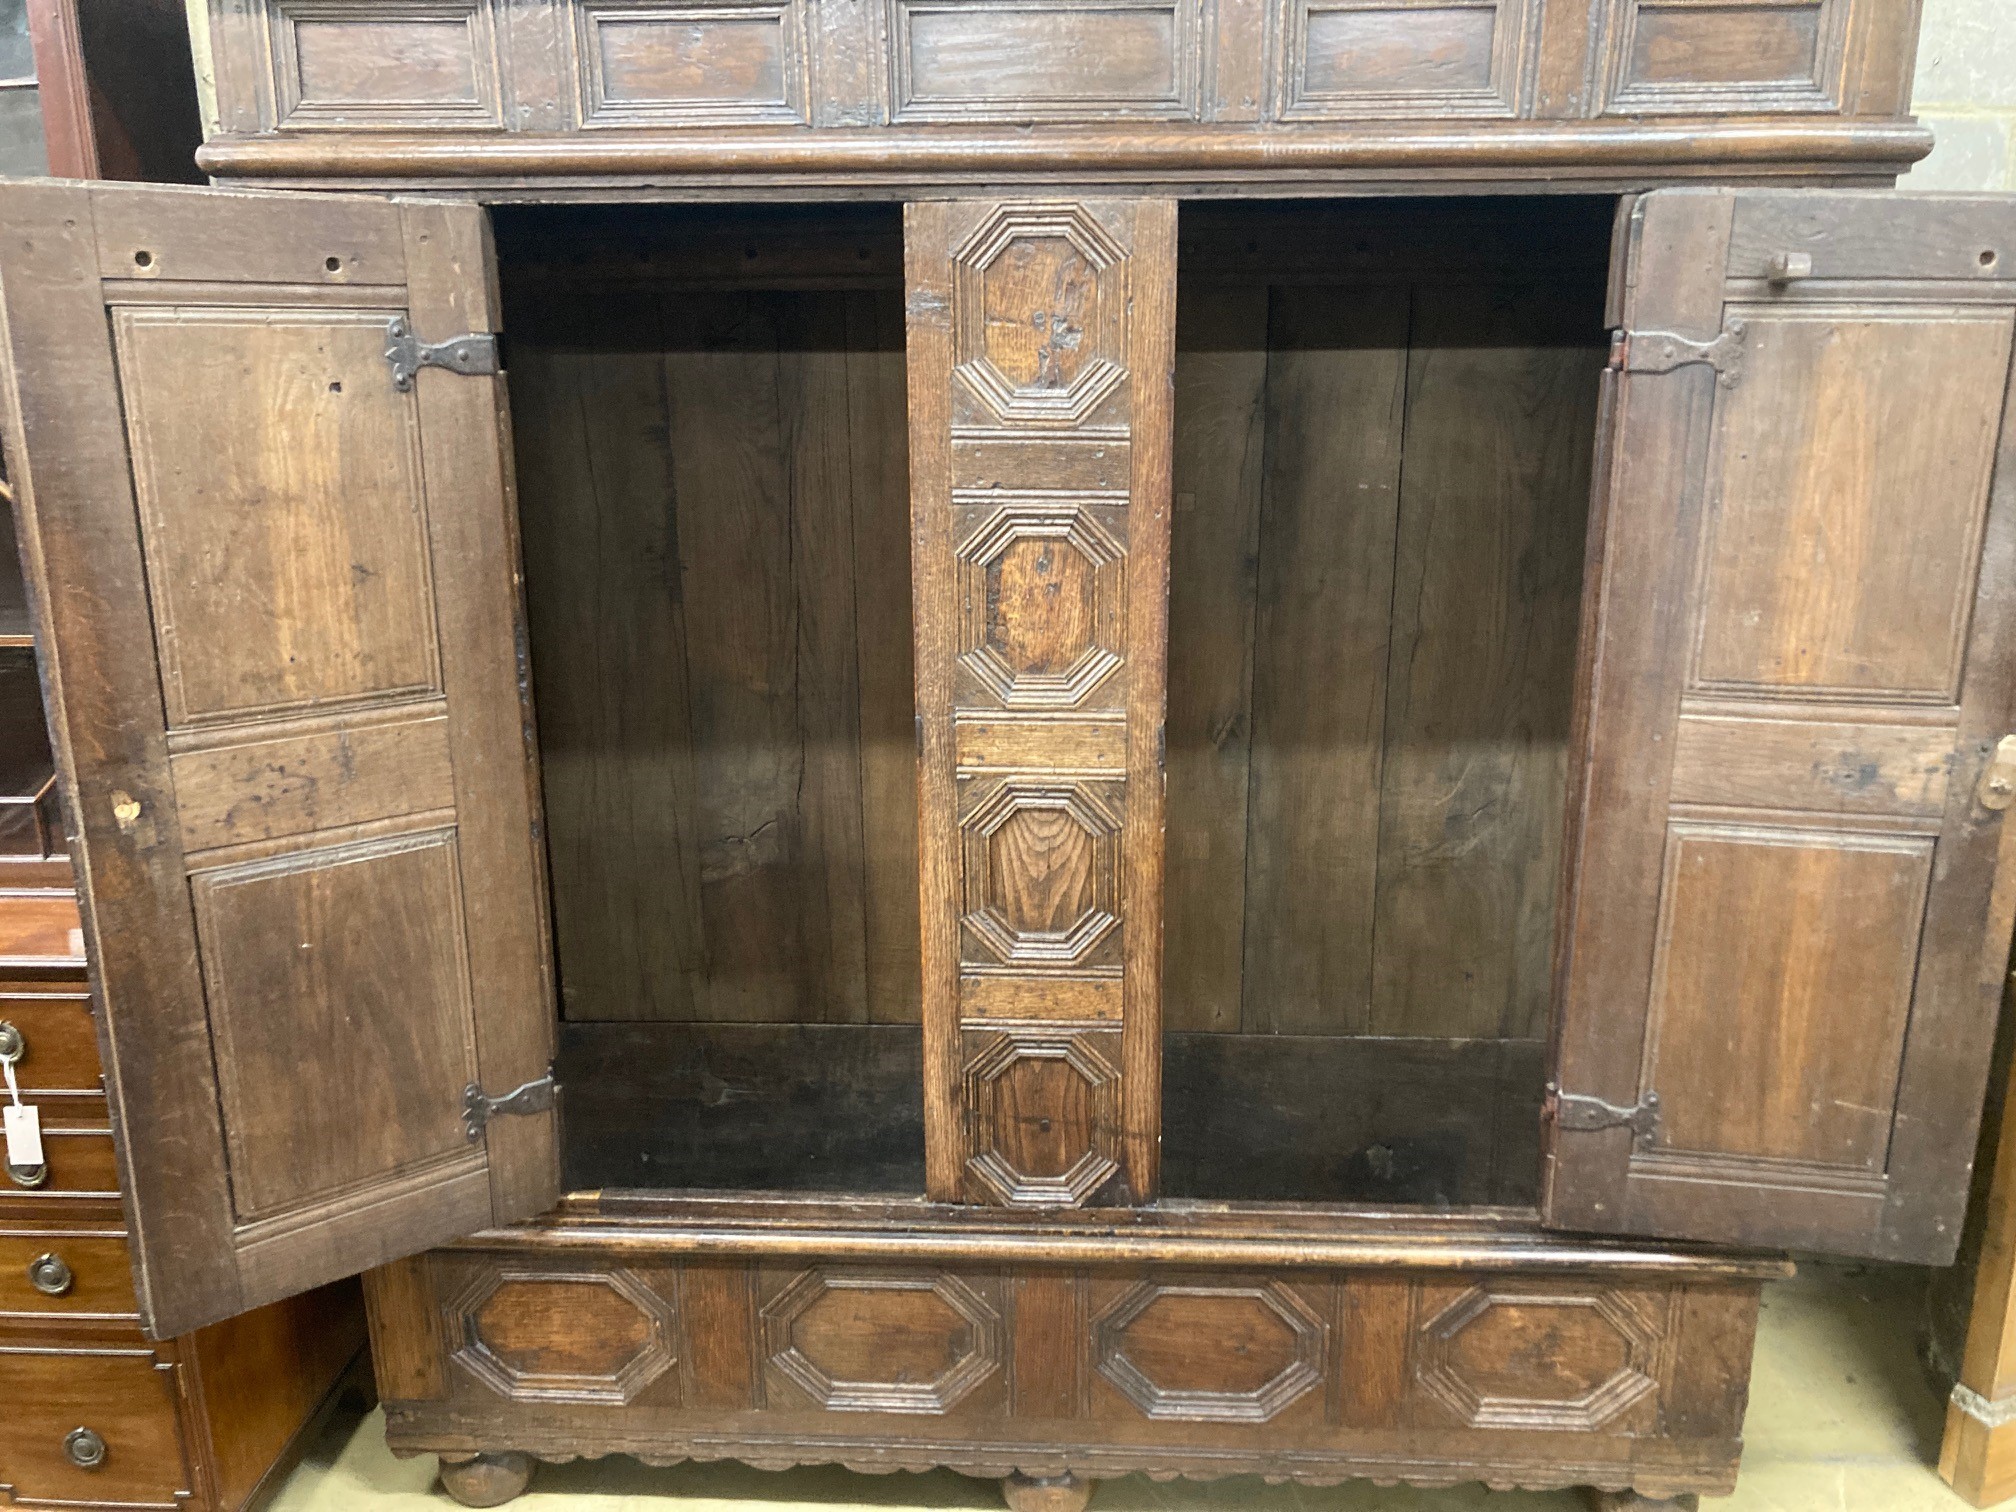 A 17th century and later panelled oak cupboard, length 194cm, depth 70cm, height 198cm